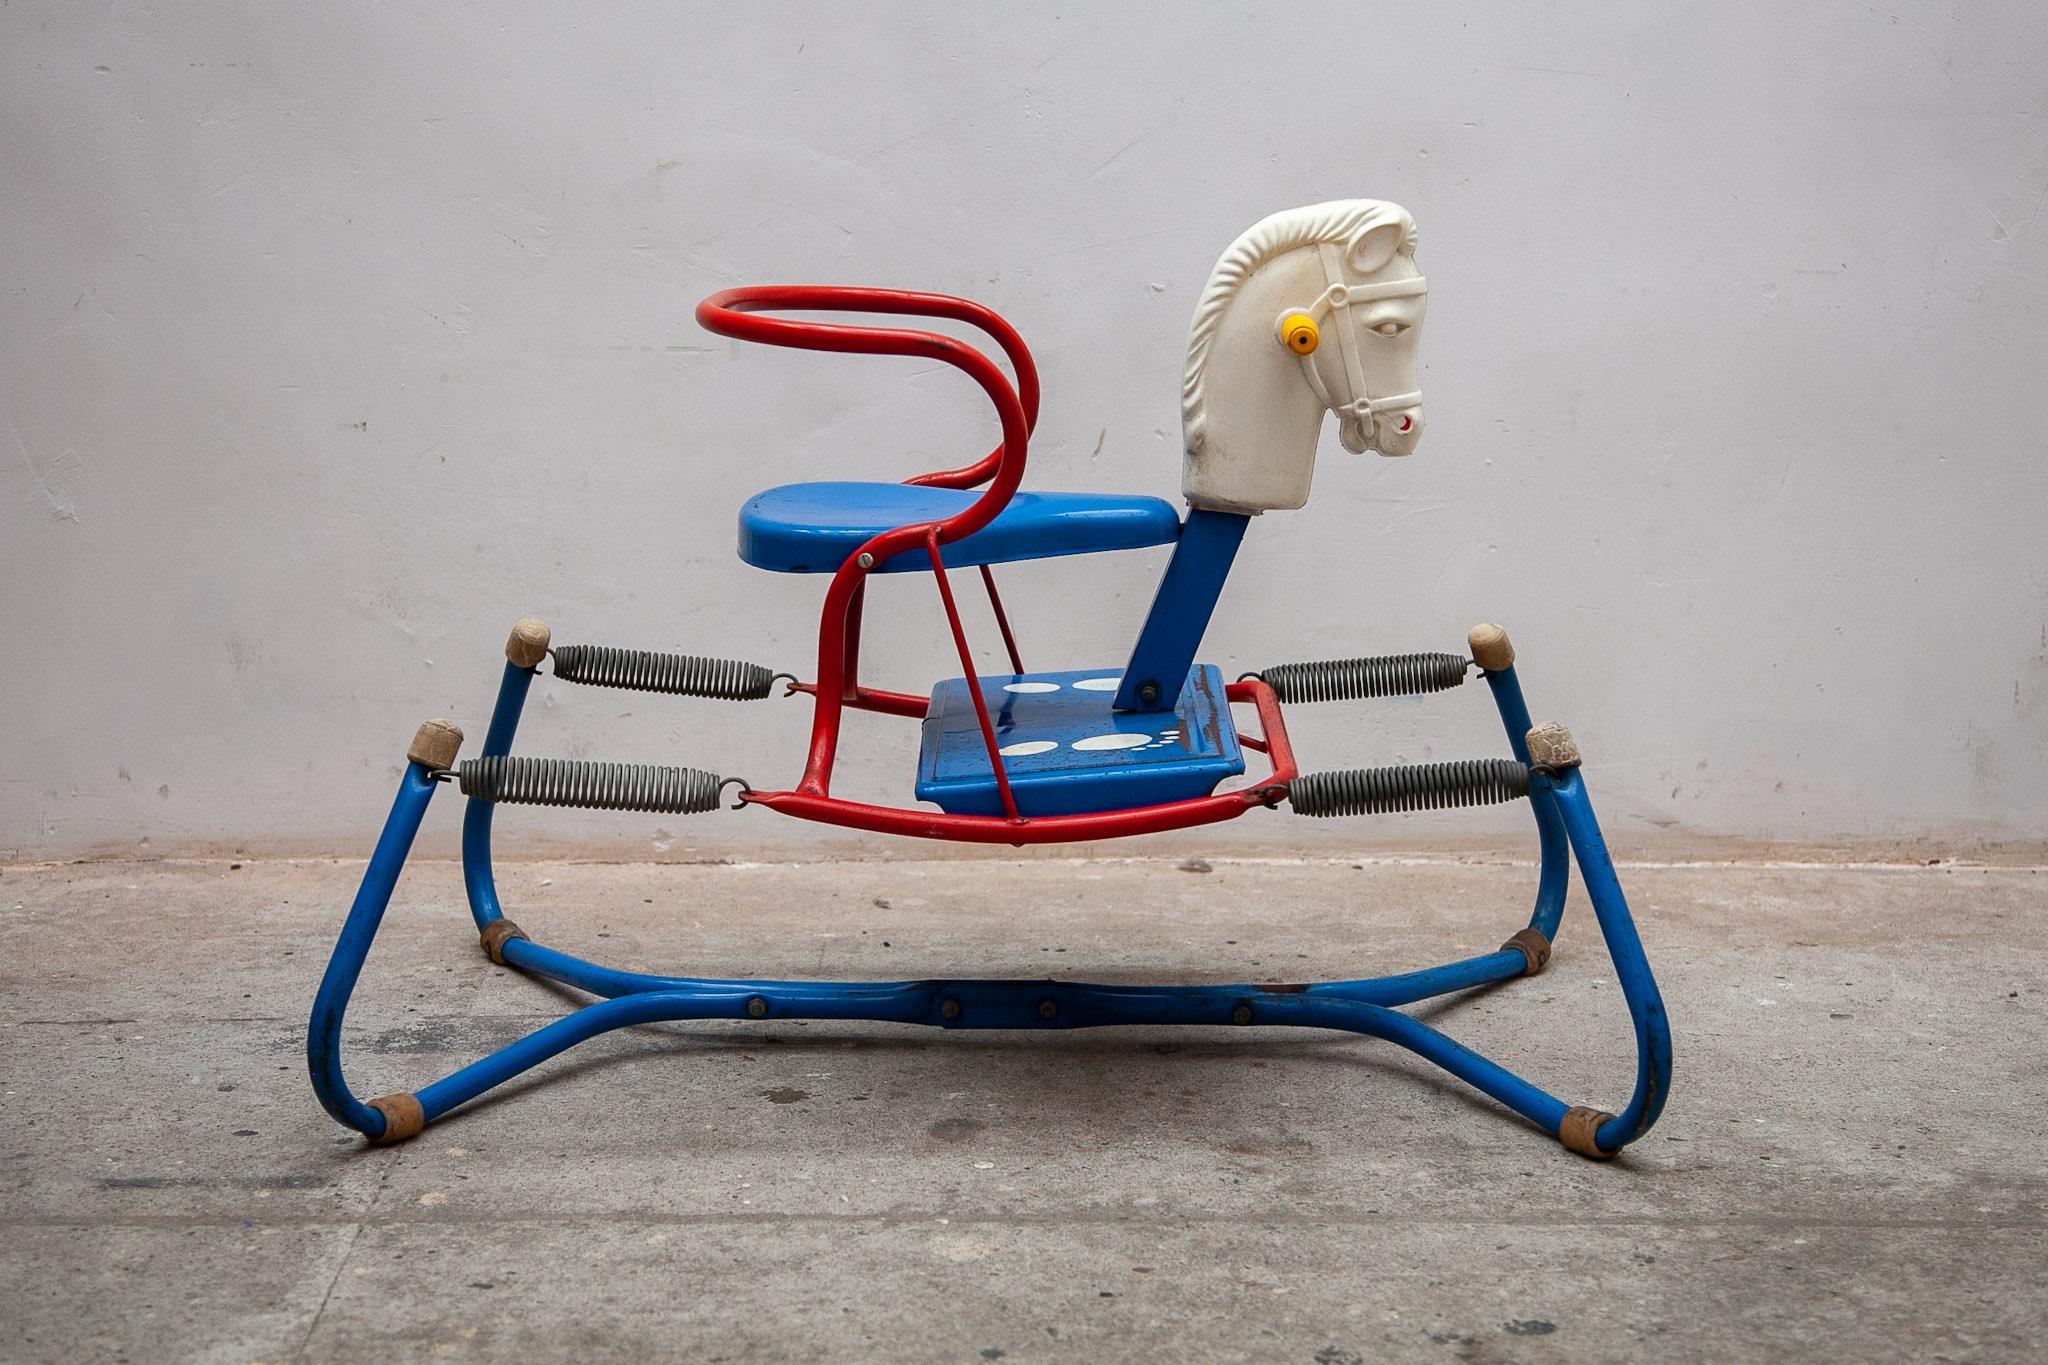 Vintage MOBO metal rocking horse 1960's This Rocking Horse was made in England by D.Sebel & Co LTD Mobo Toys. This metal horse toy is standing on a frame with springs to rock. With a blue saddle and frame and a white plastic horse head. A midcentury